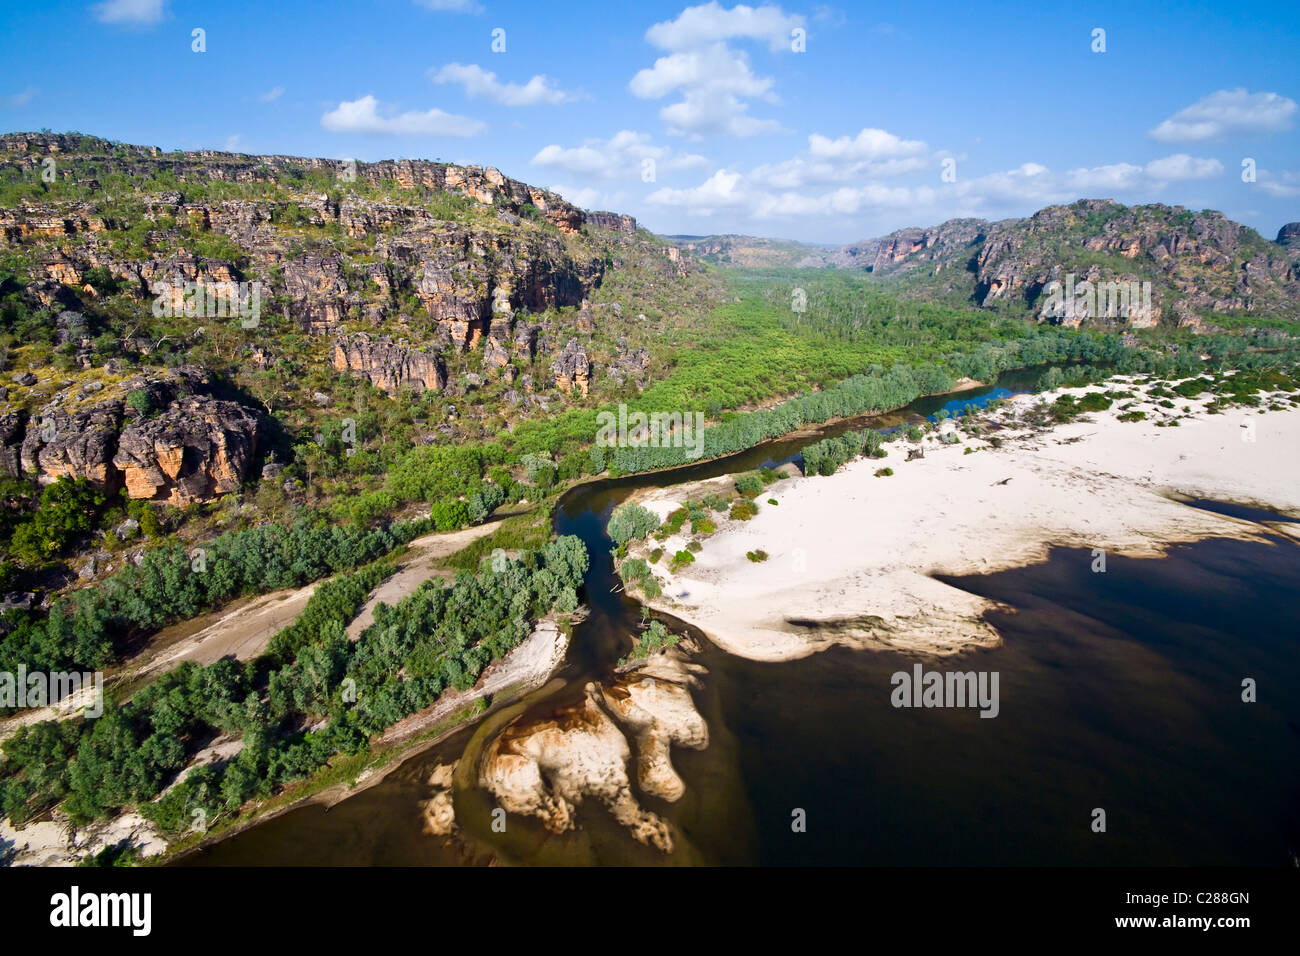 A river deposits large sand beaches at the mouth of a sandstone gorge. Stock Photo